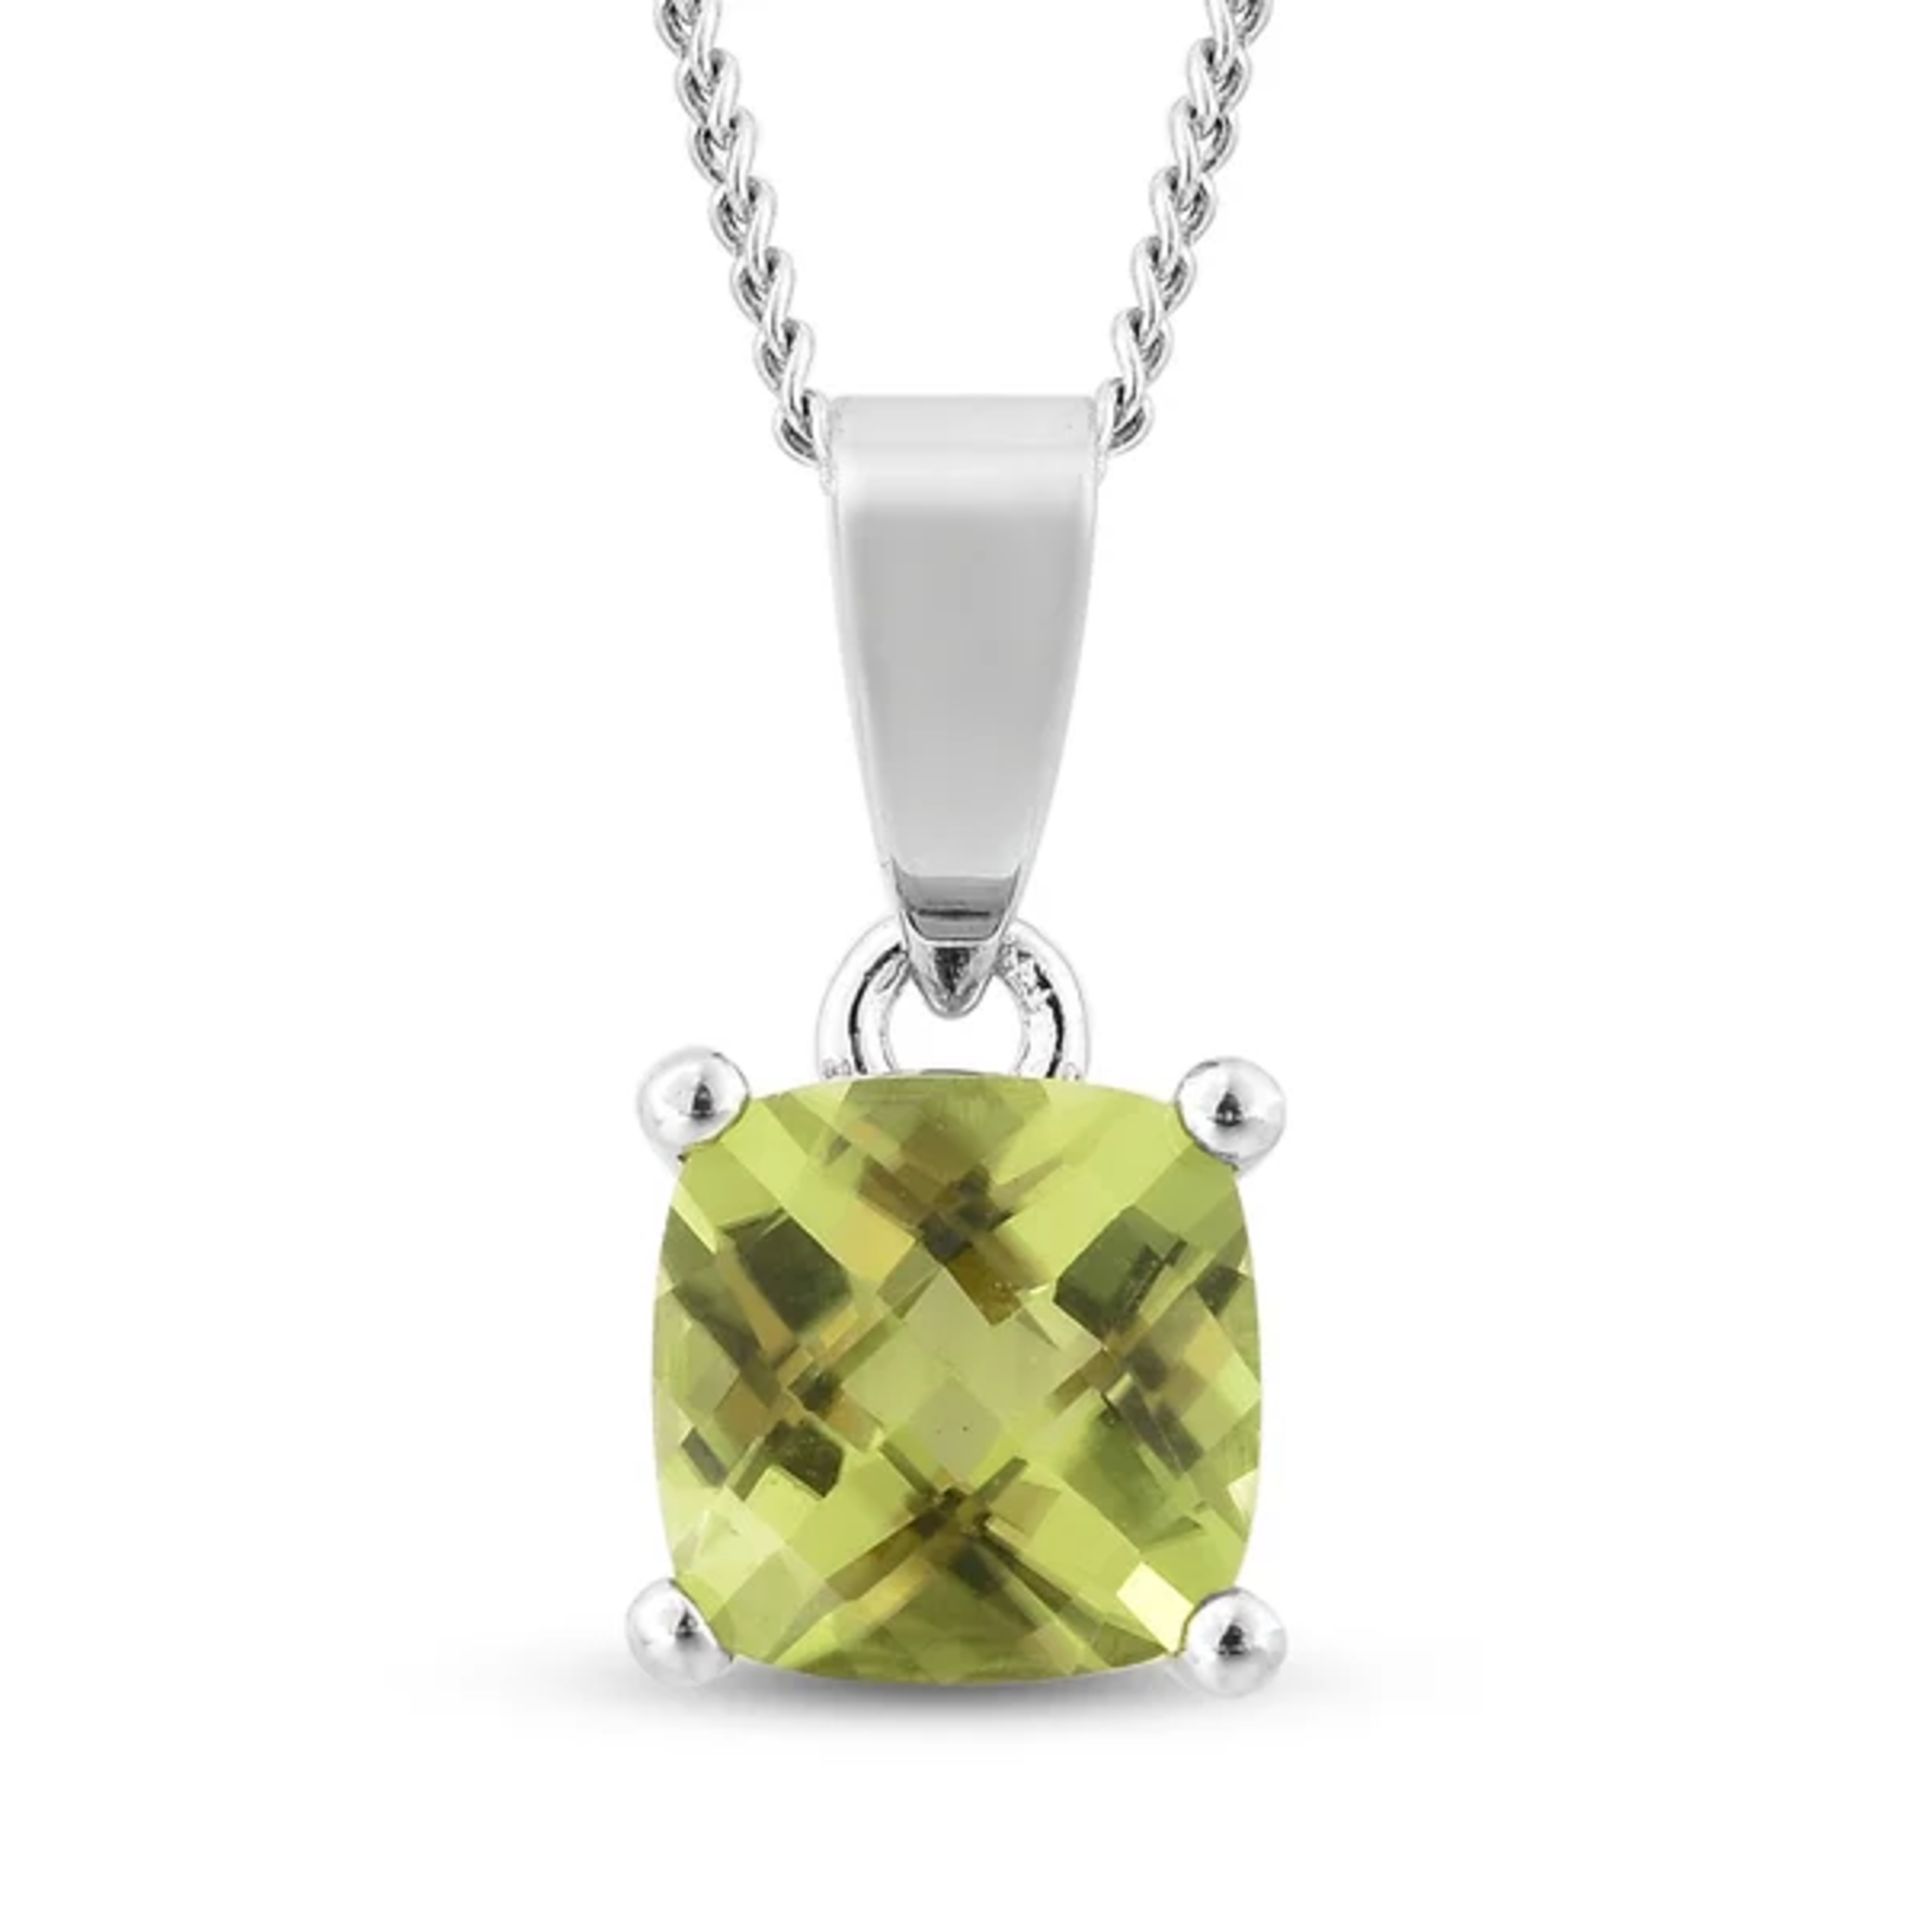 New! 3 Piece Set - Hebei Peridot Solitaire Ring, Pendant and Stud Earrings - Image 5 of 7